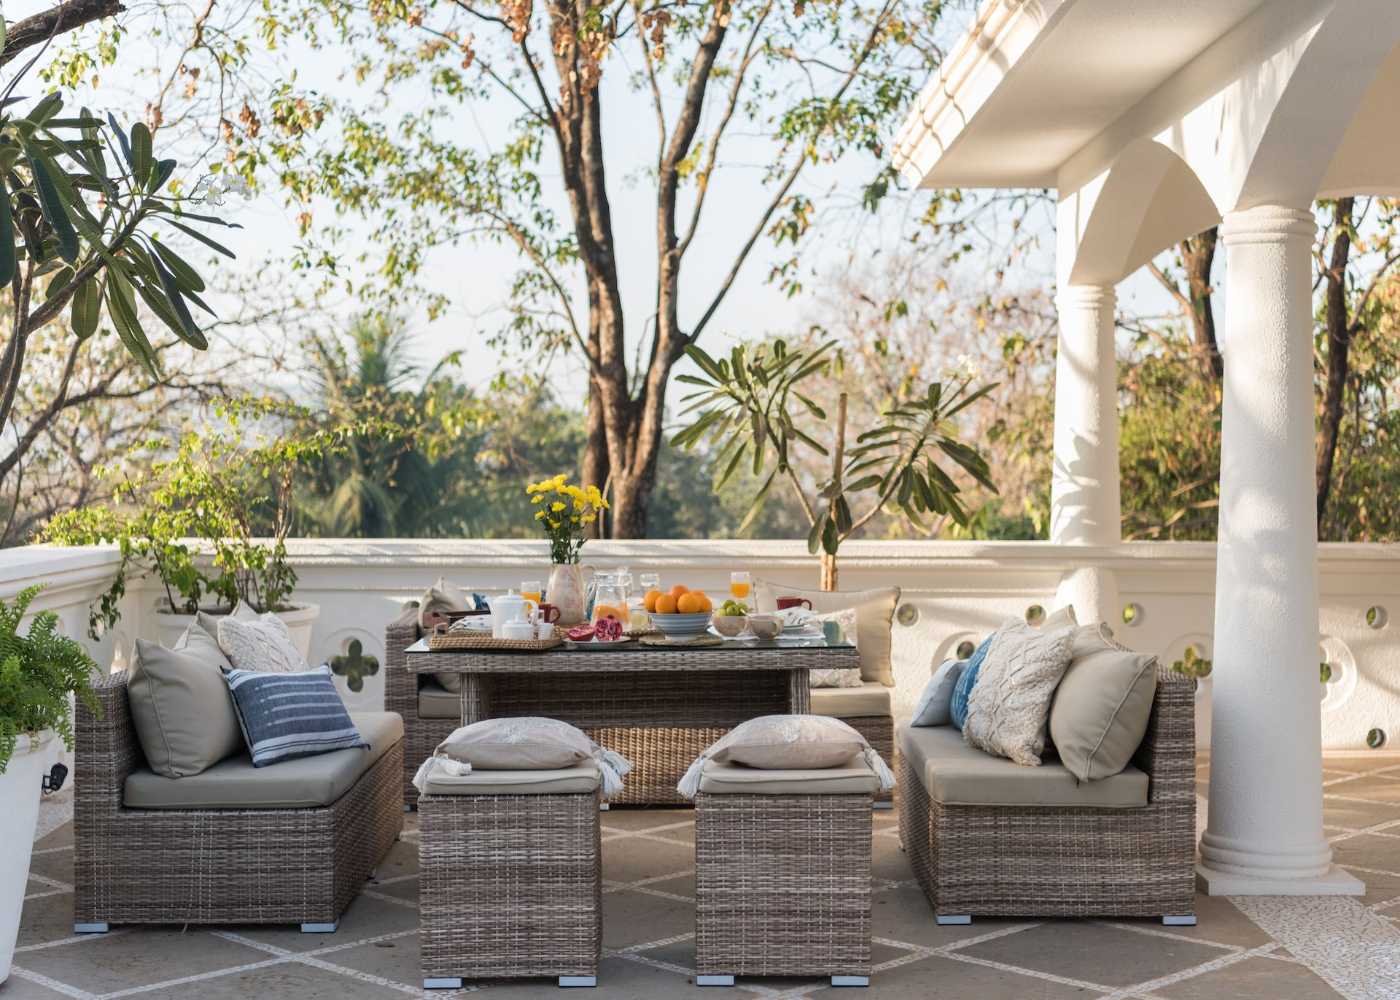 Finding the perfect balance between style and comfort in your outdoor furniture